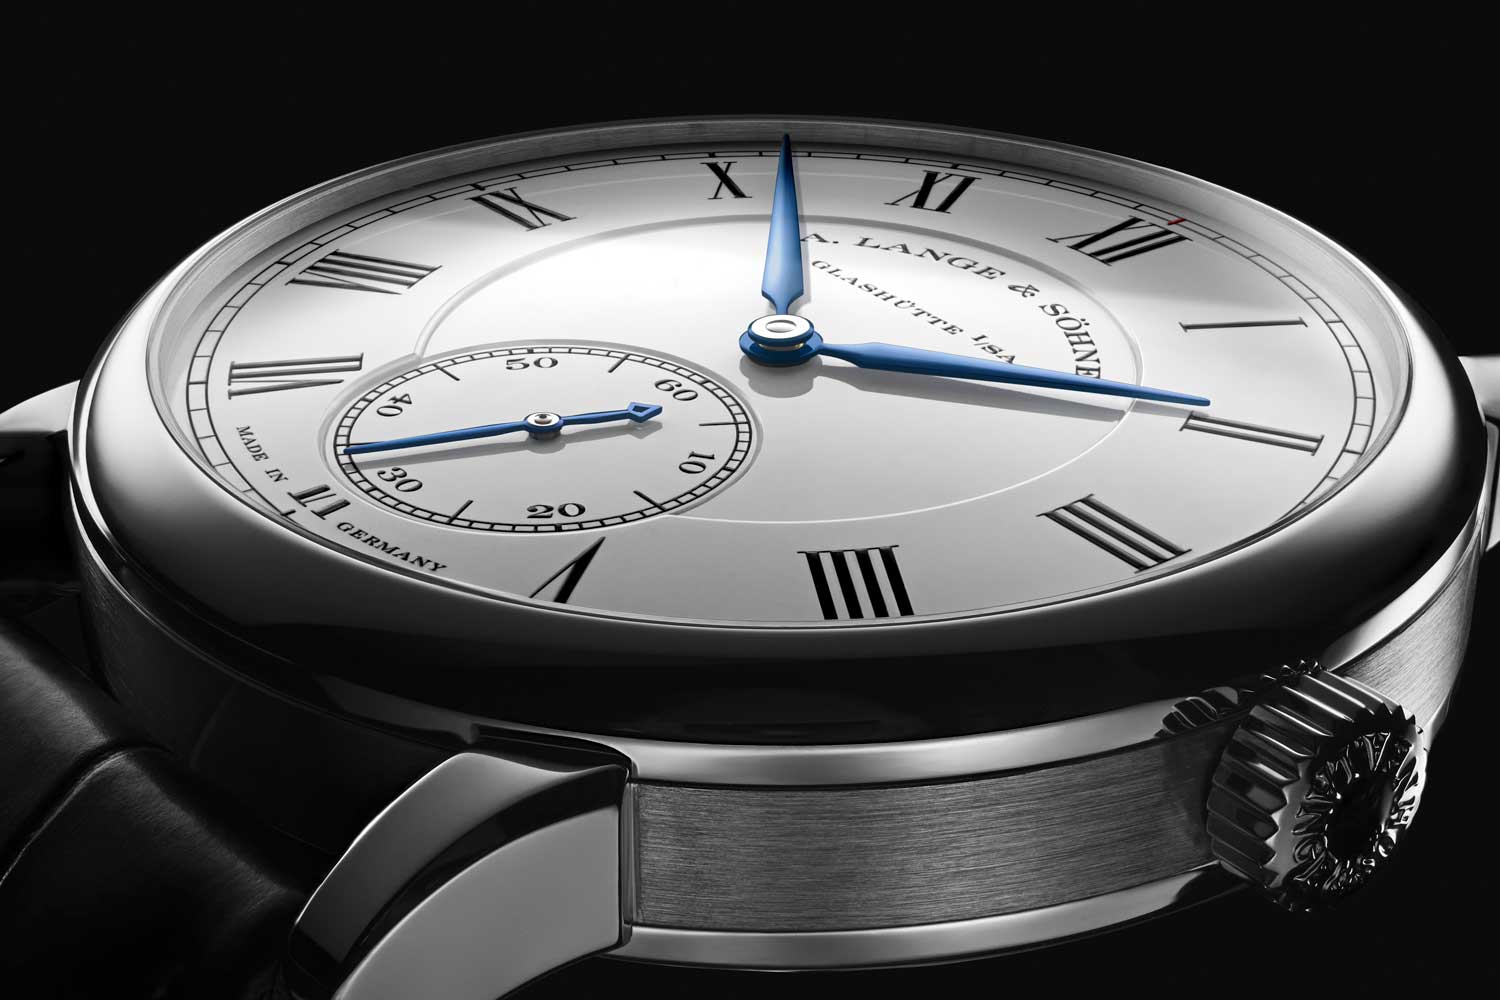 The Richard Lange Minute Repeater sports a modest case height of 9.7mm